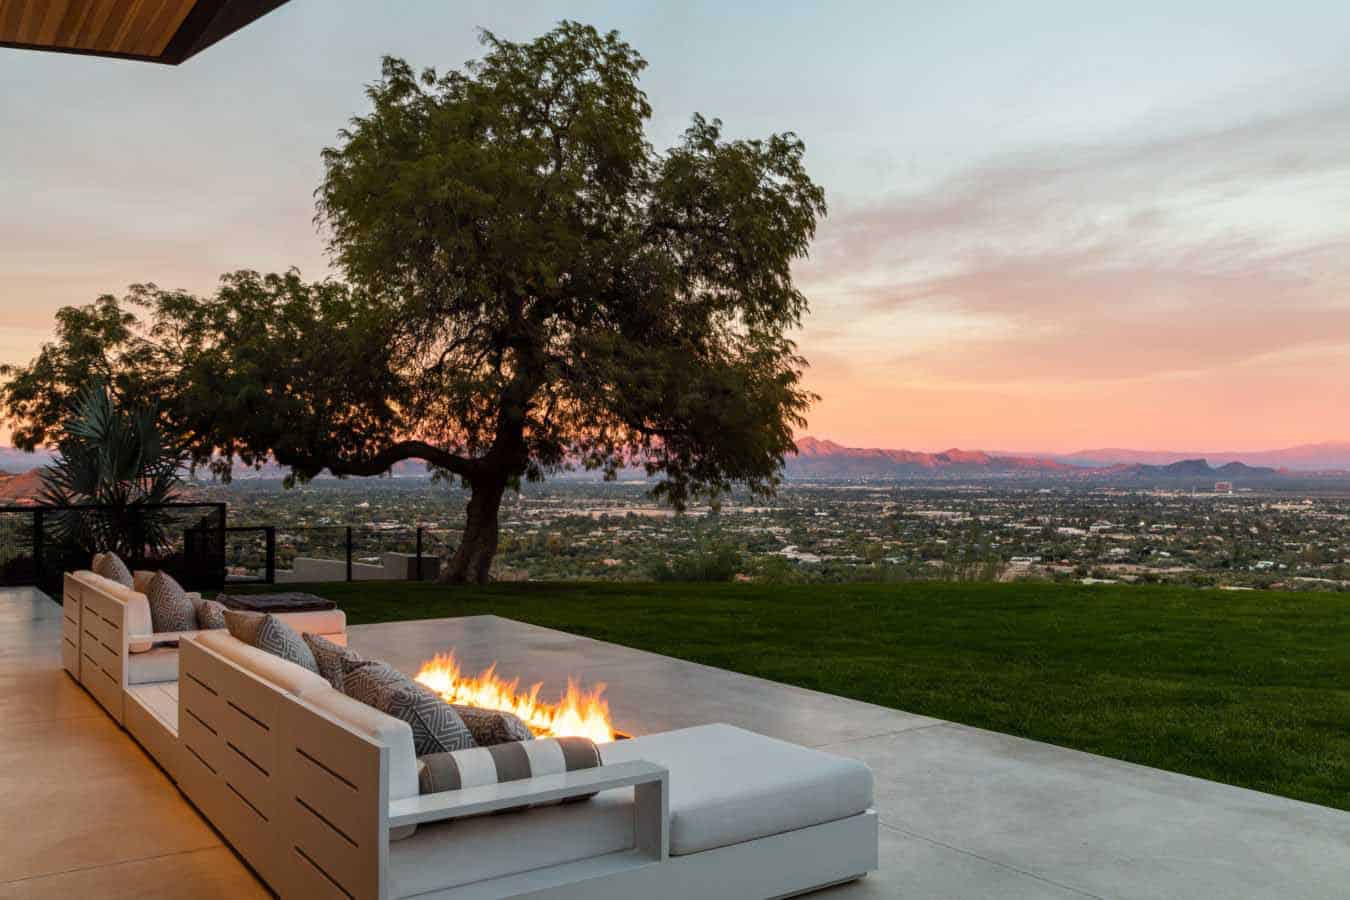 contemporary-arizona-desert-house-patio-with-a-fire-pit-at-dusk